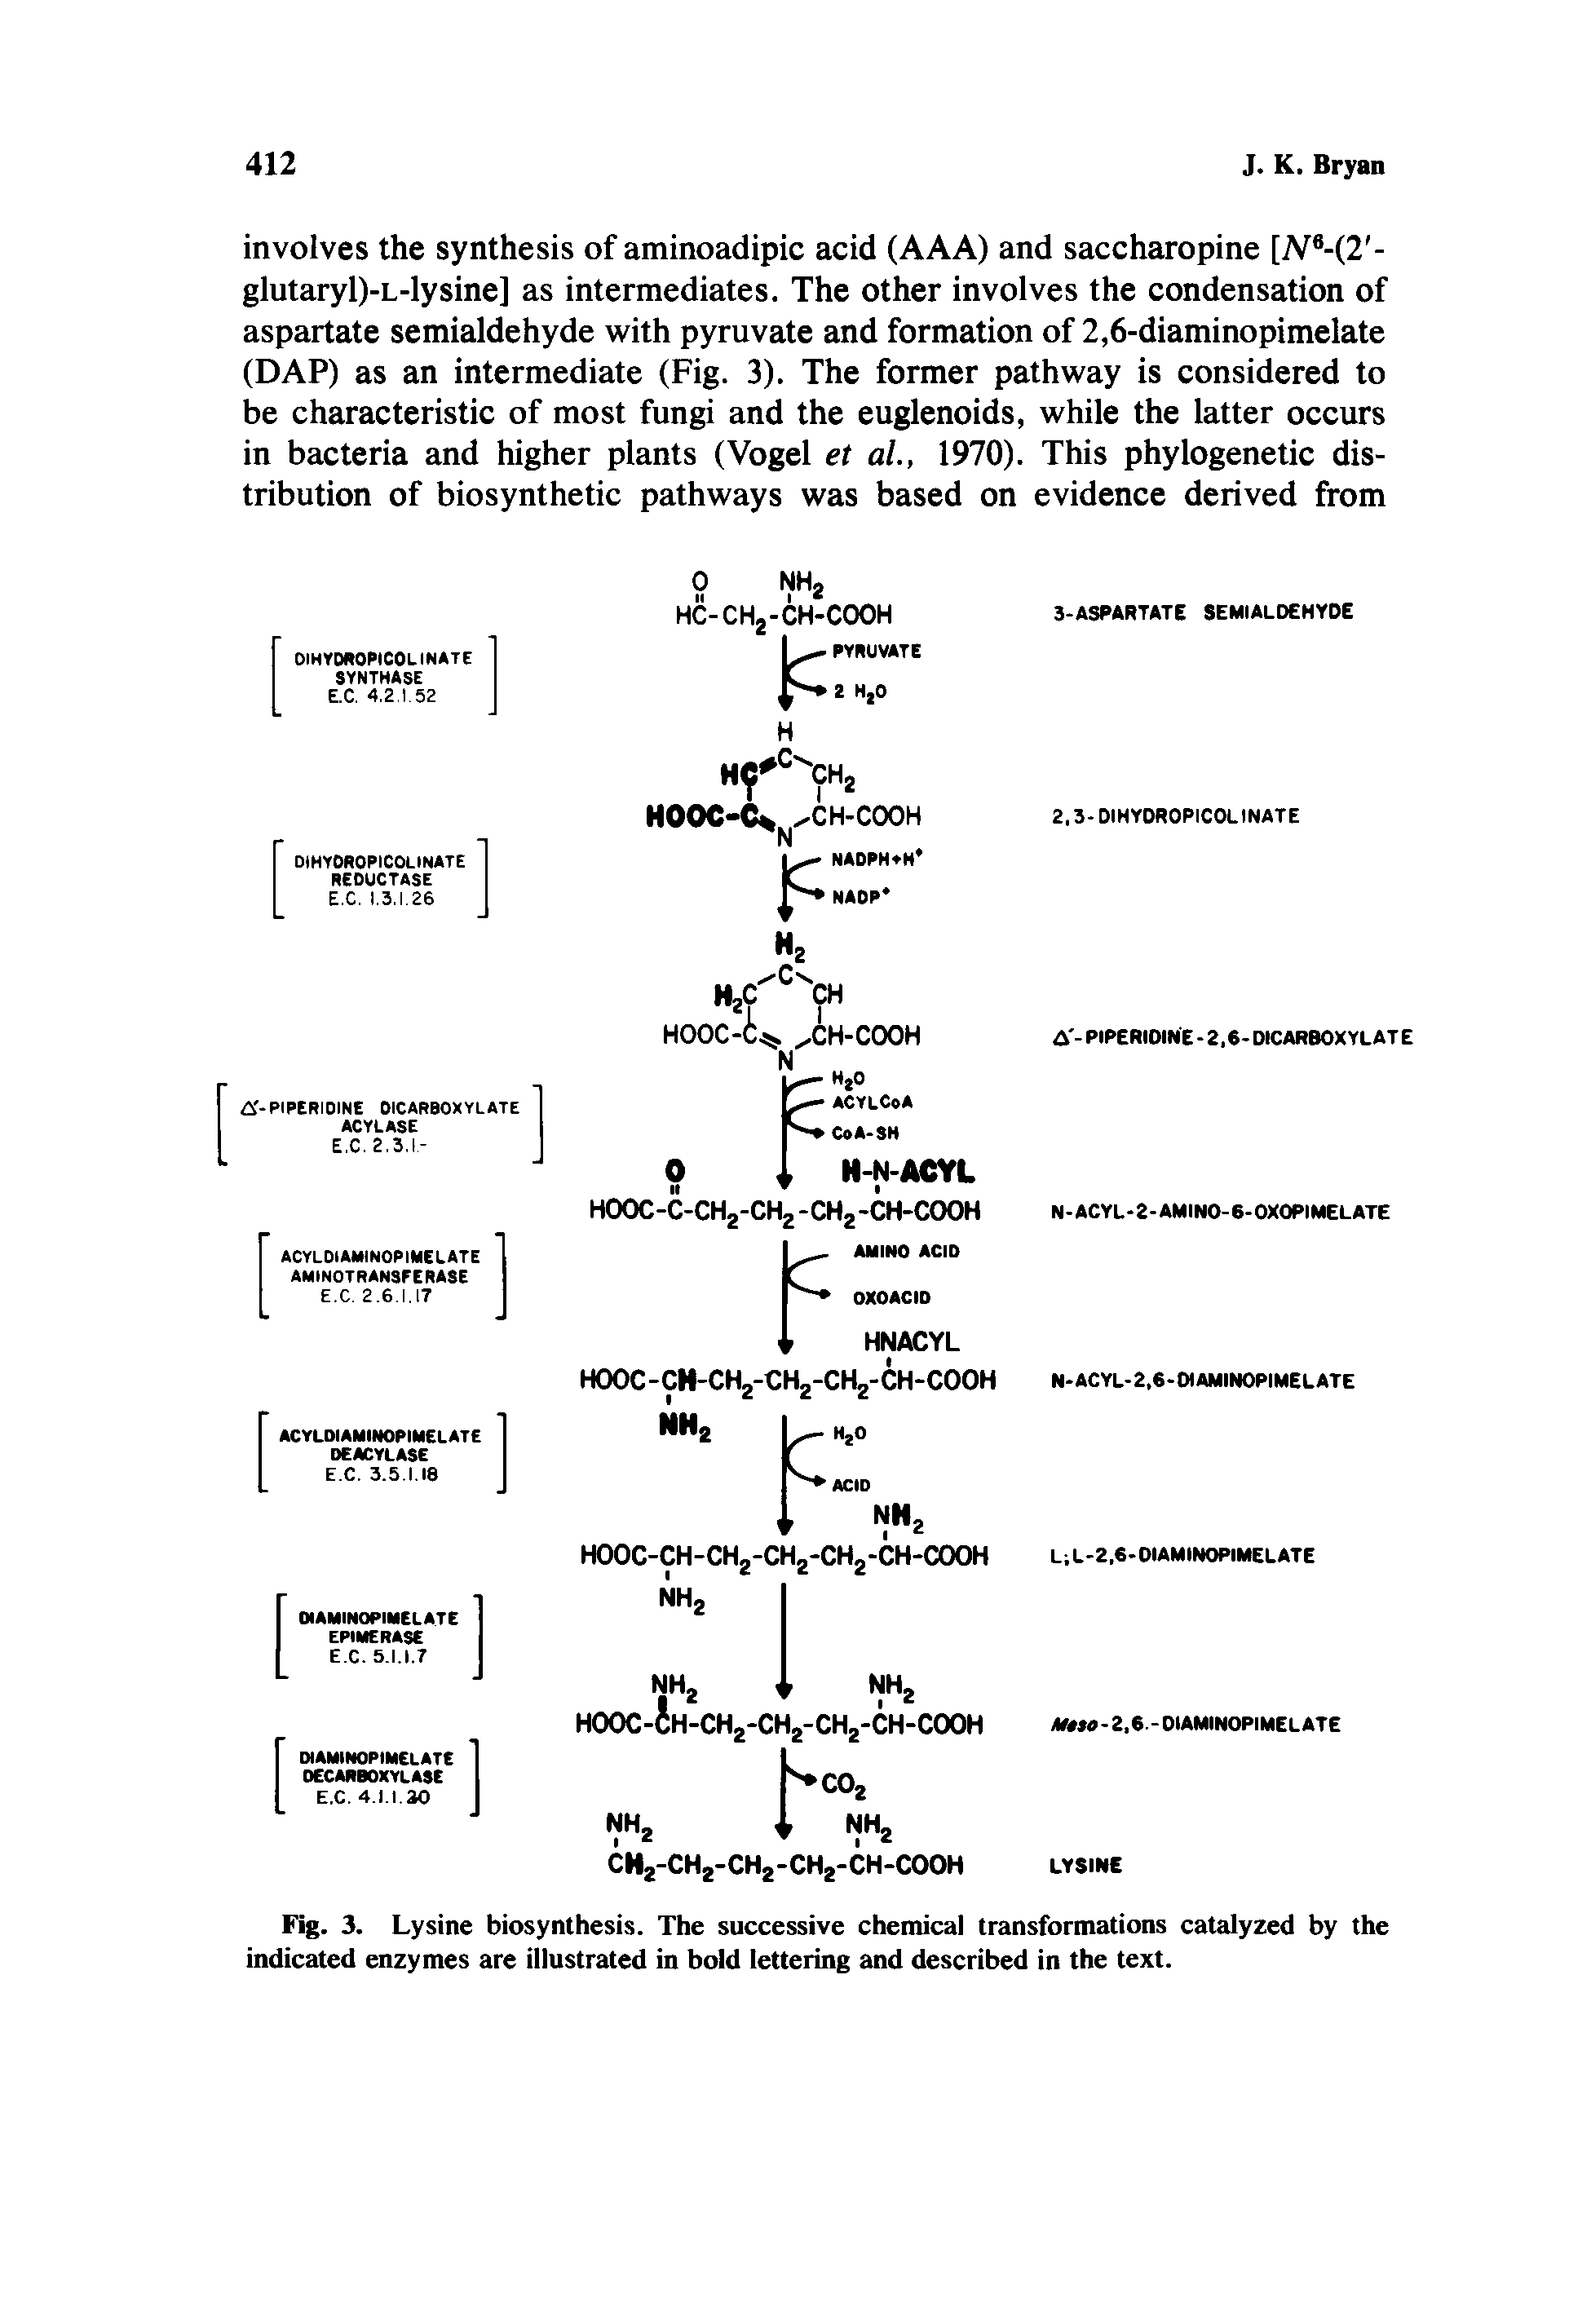 Fig. 3. Lysine biosynthesis. The successive chemical transformations catalyzed by the indicated enzymes are illustrated in bold lettering and described in the text.